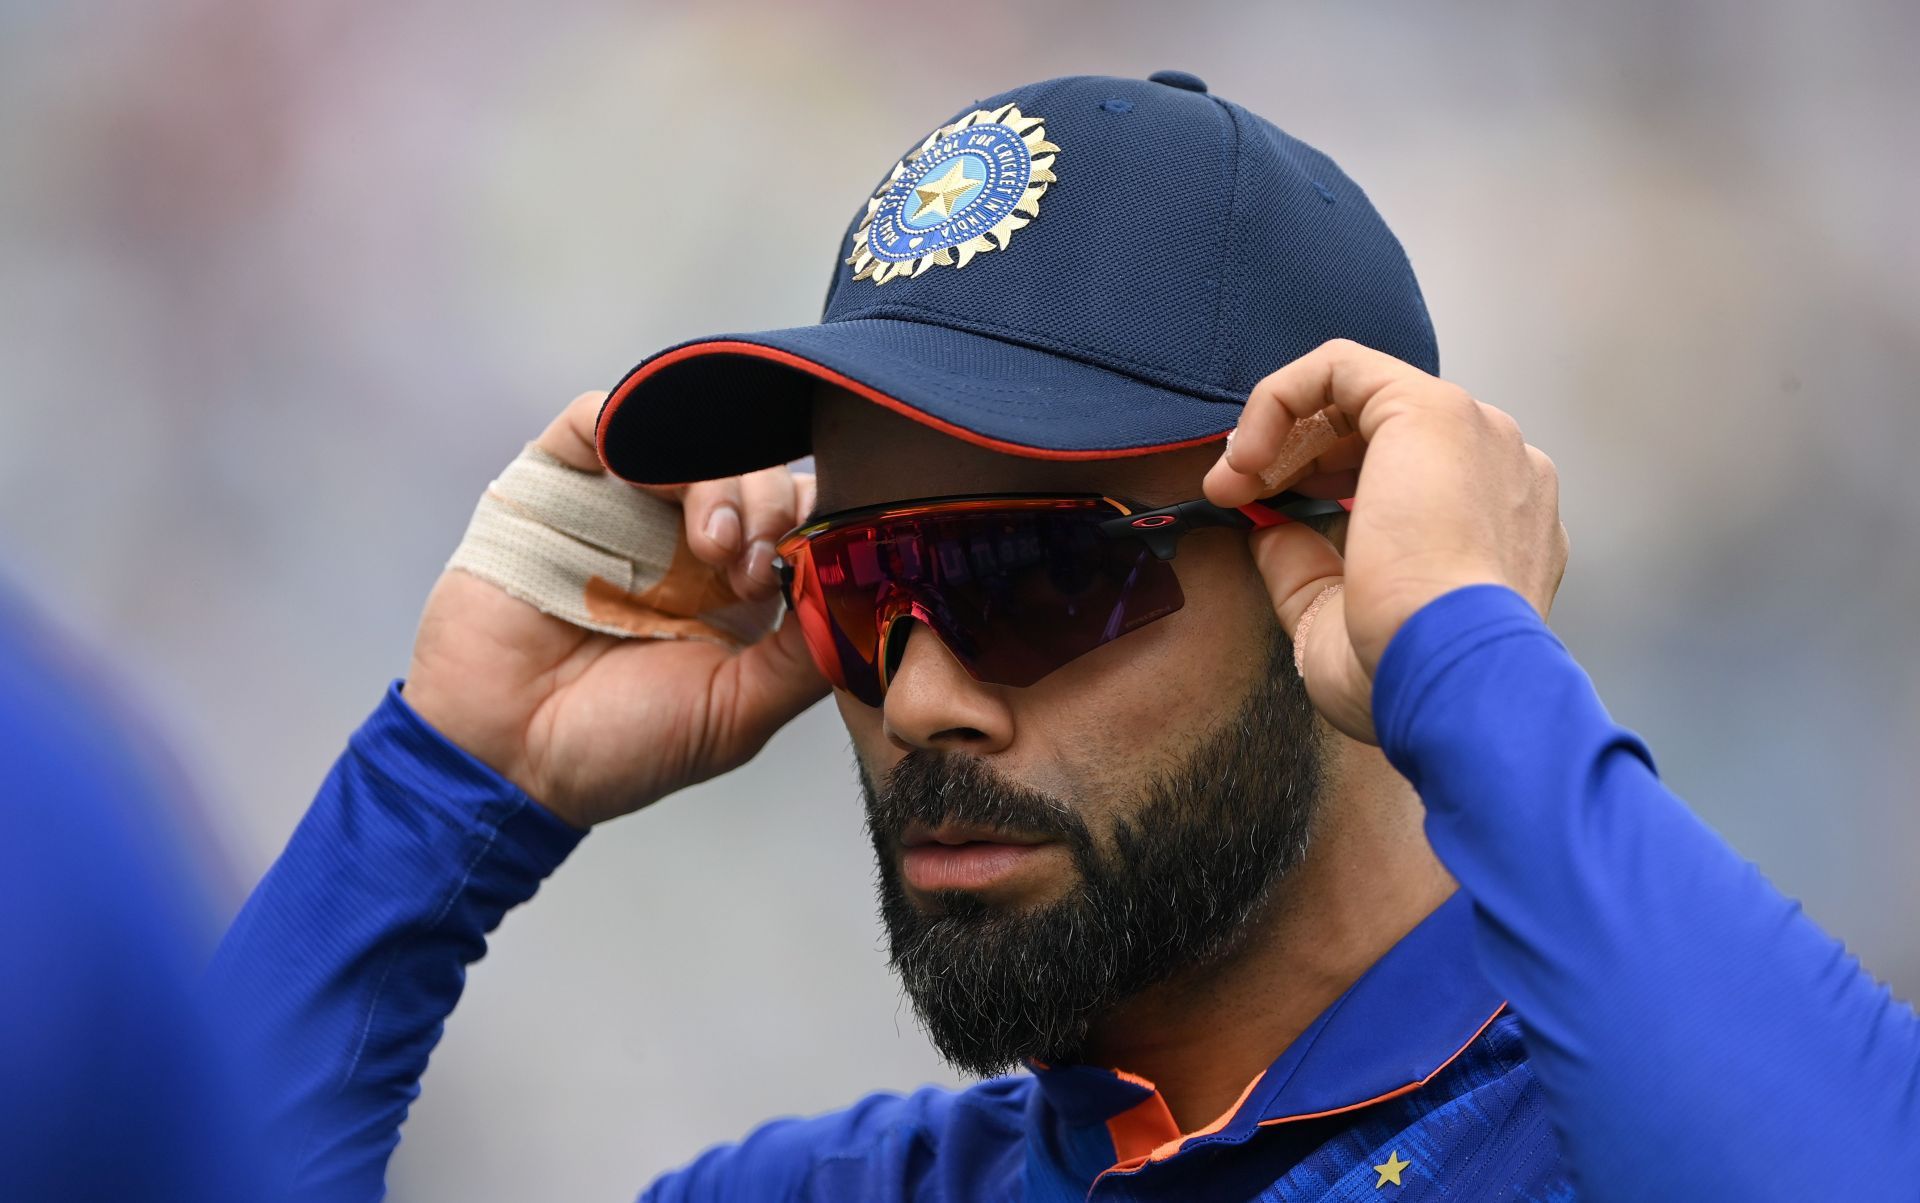 Virat Kohli has been following the recently concluded tour of England